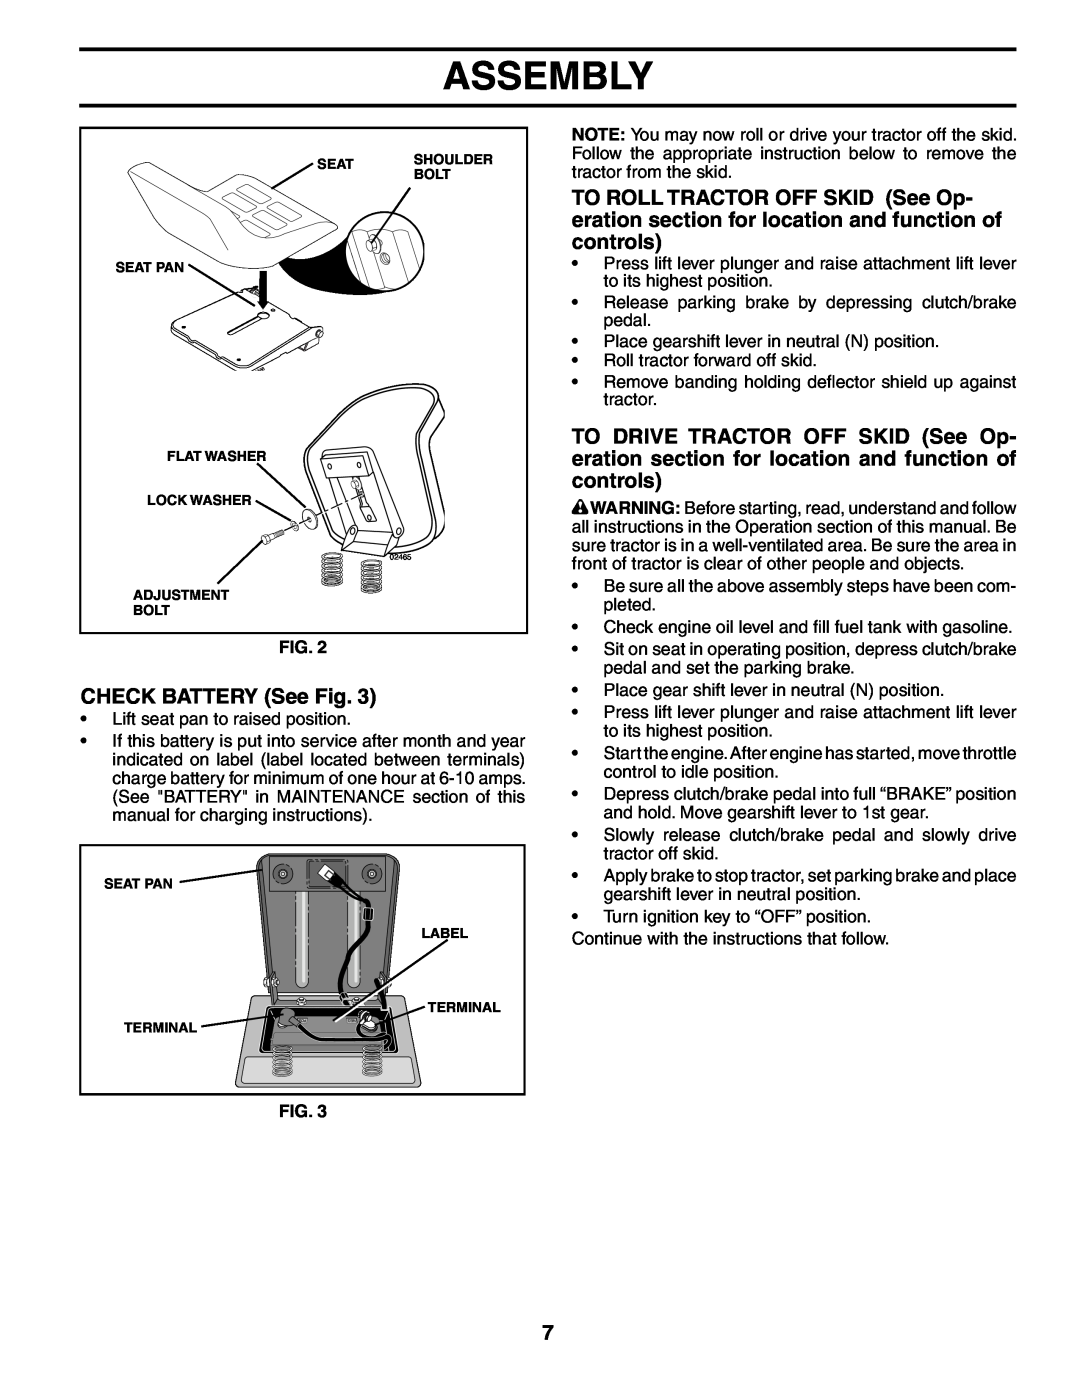 Poulan HD13538 manual CHECK BATTERY See Fig, Assembly 